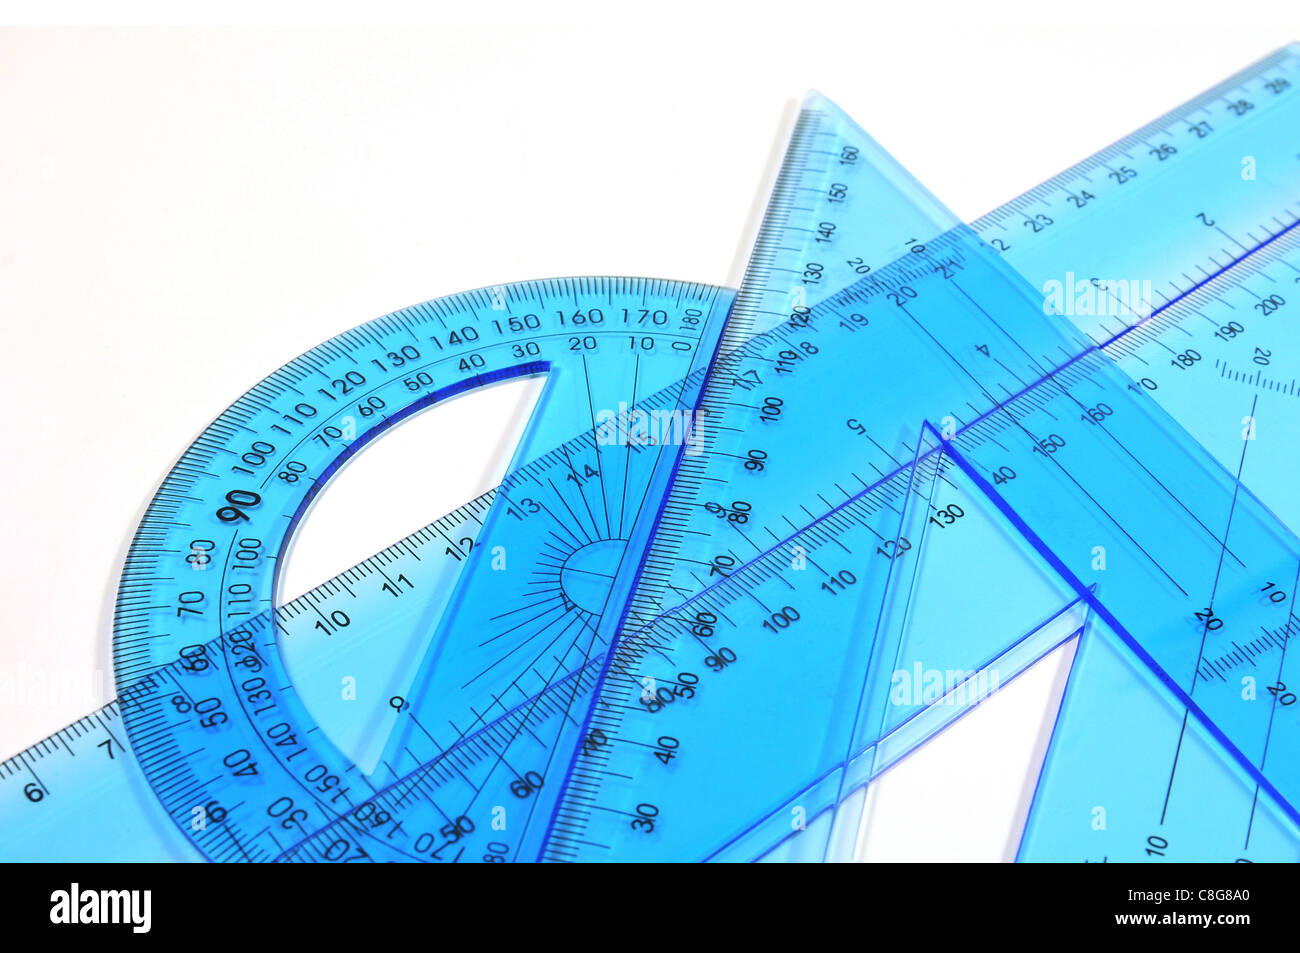 Architecture tools - Set of ruler, triangle and protractor on